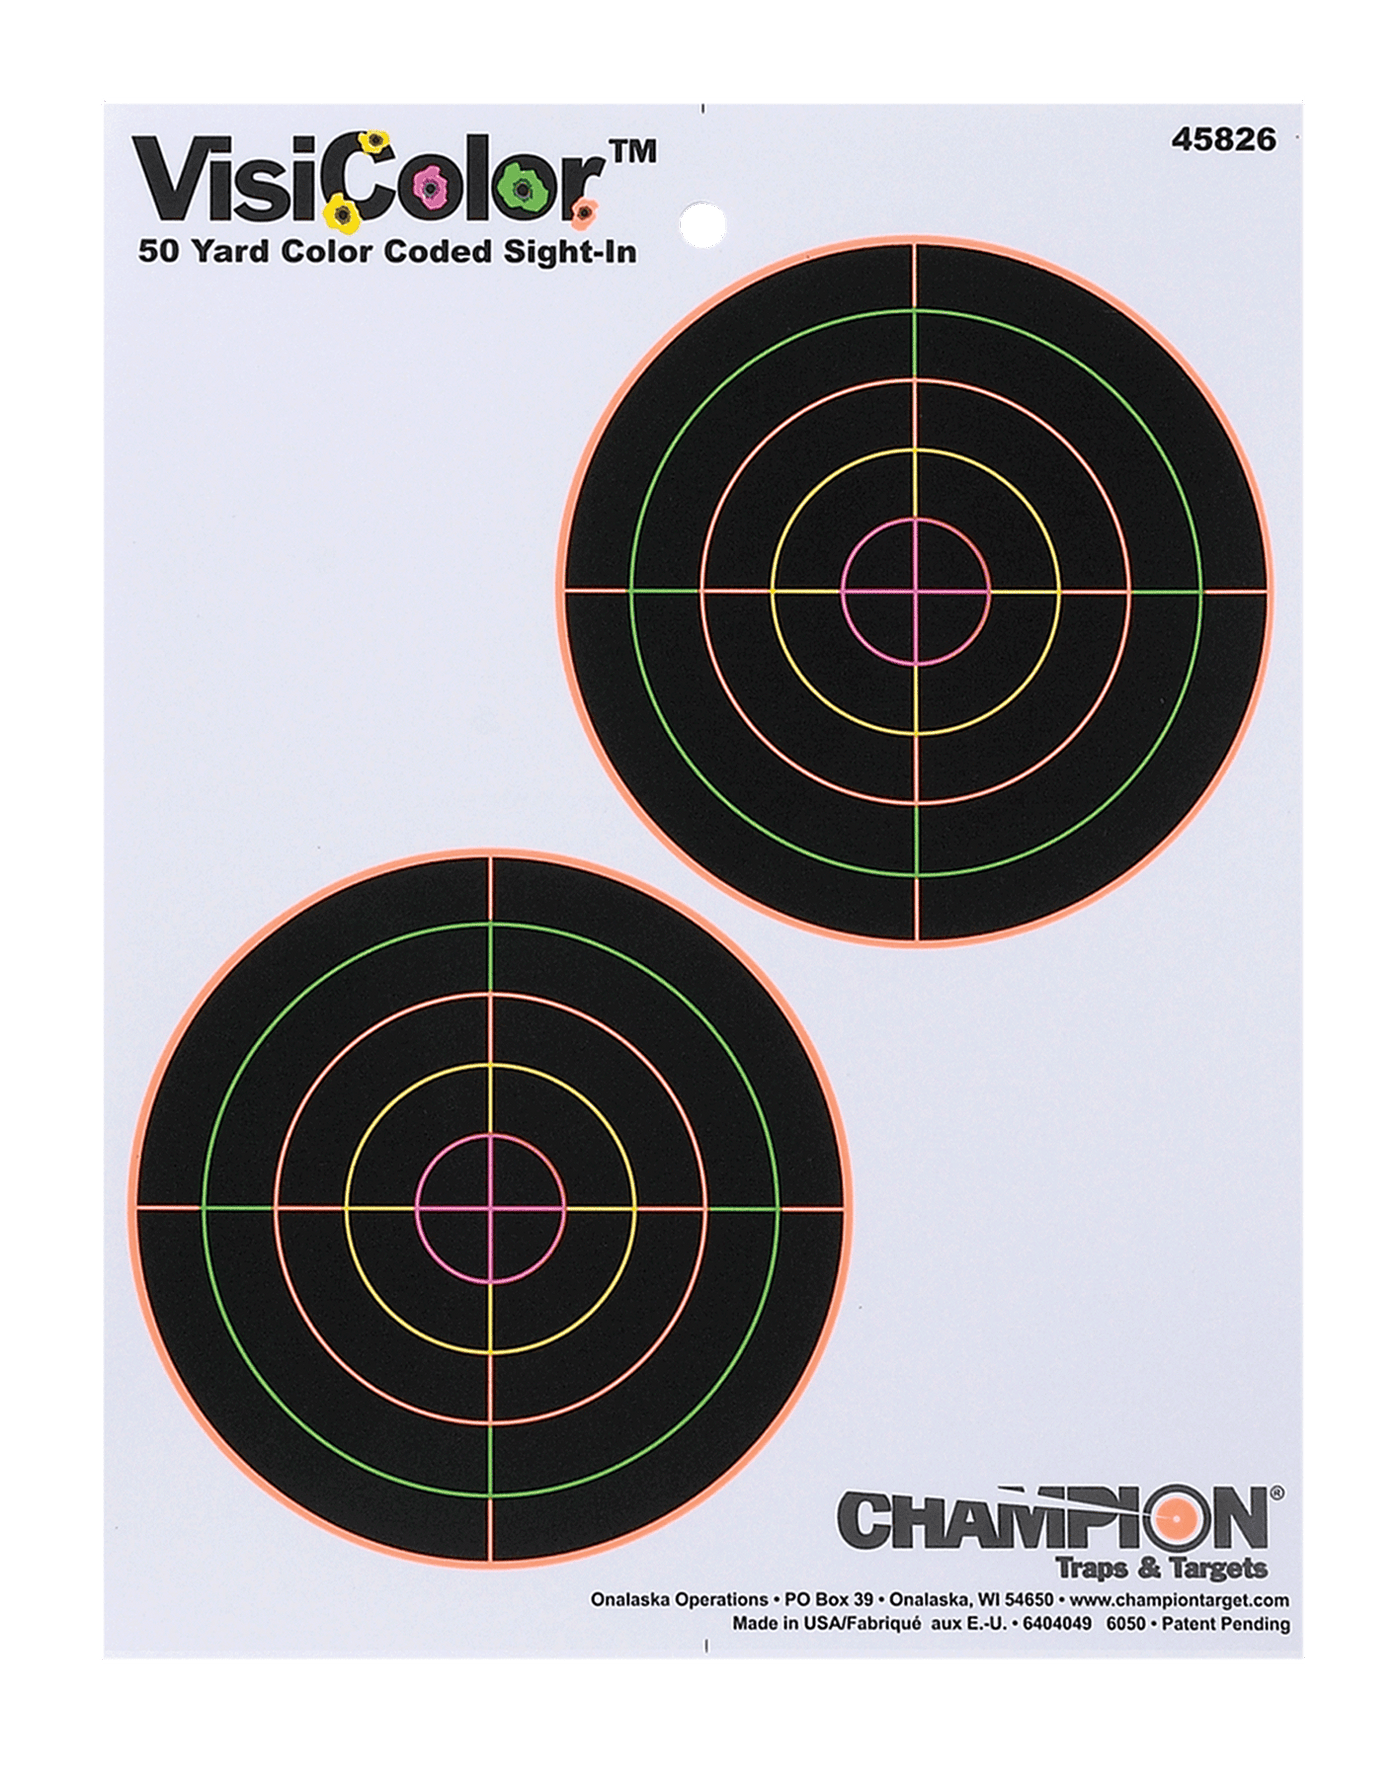 Champion Targets Champion Targets Visicolor, Champ 45826 Visicolor Dbl Bull 5in  10 Shooting